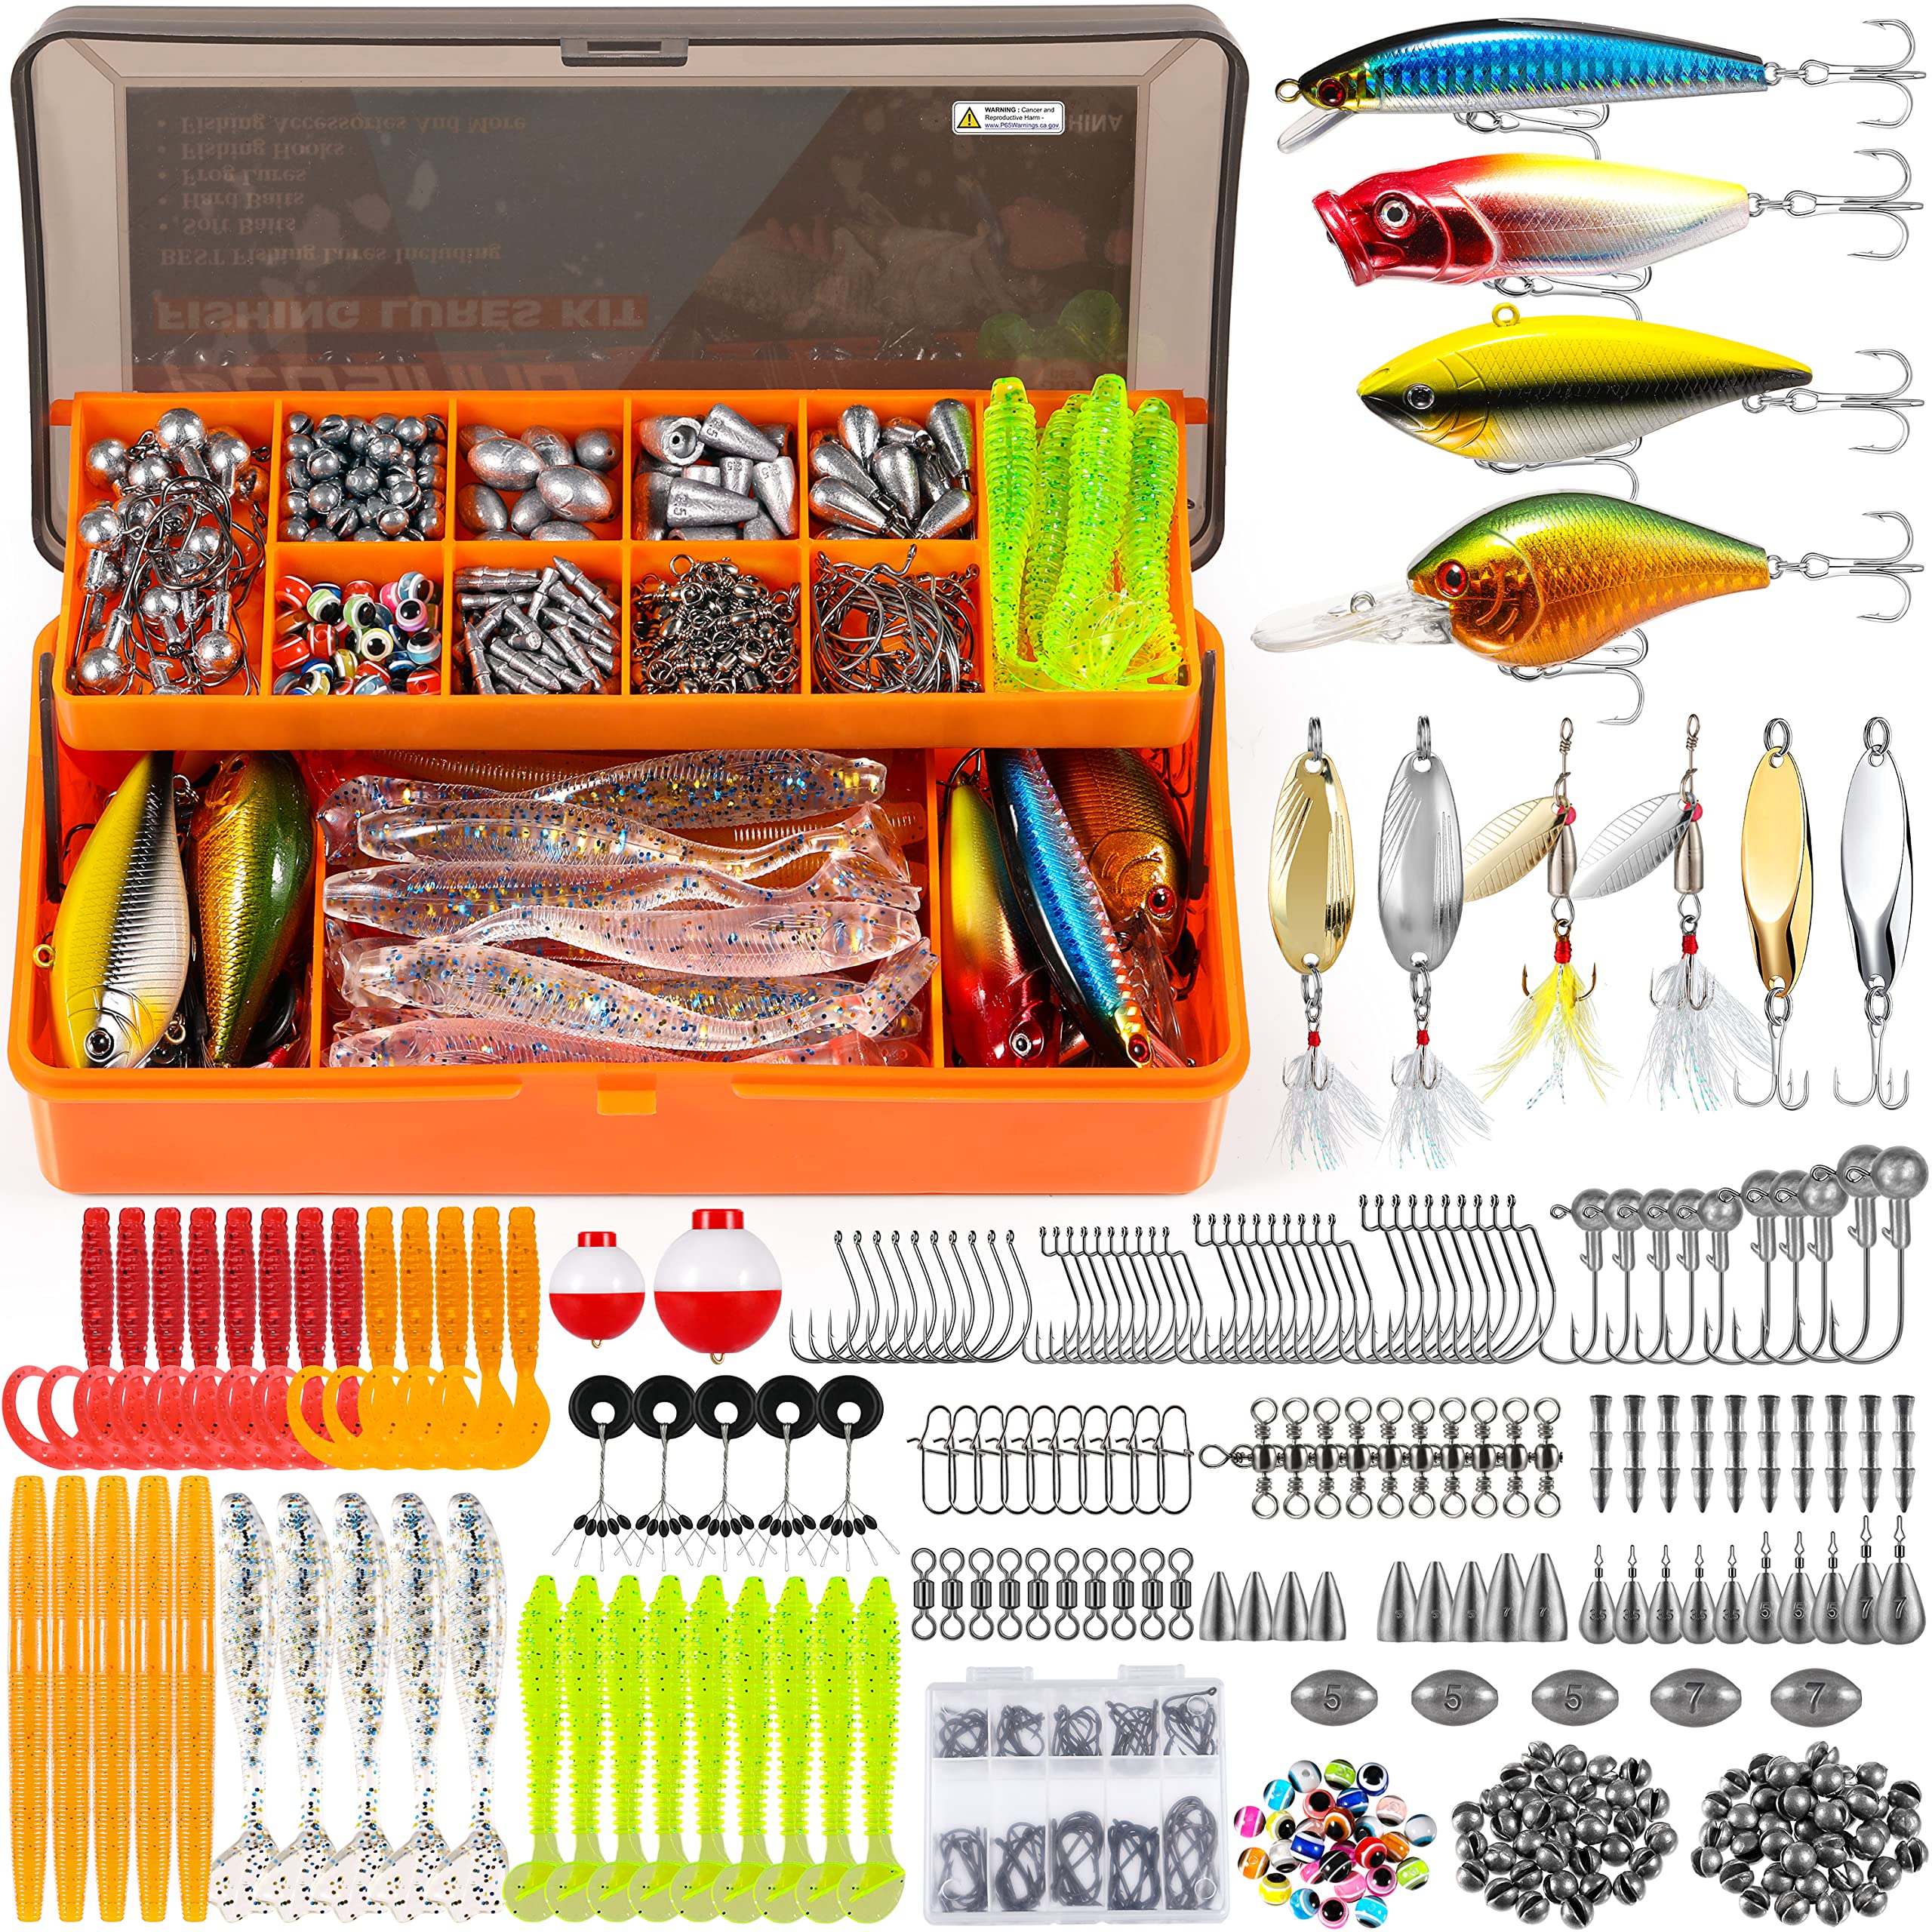 PLUSINNO Fishing Lures for 12 Rigs, Fishing Tackle Box with Tackle